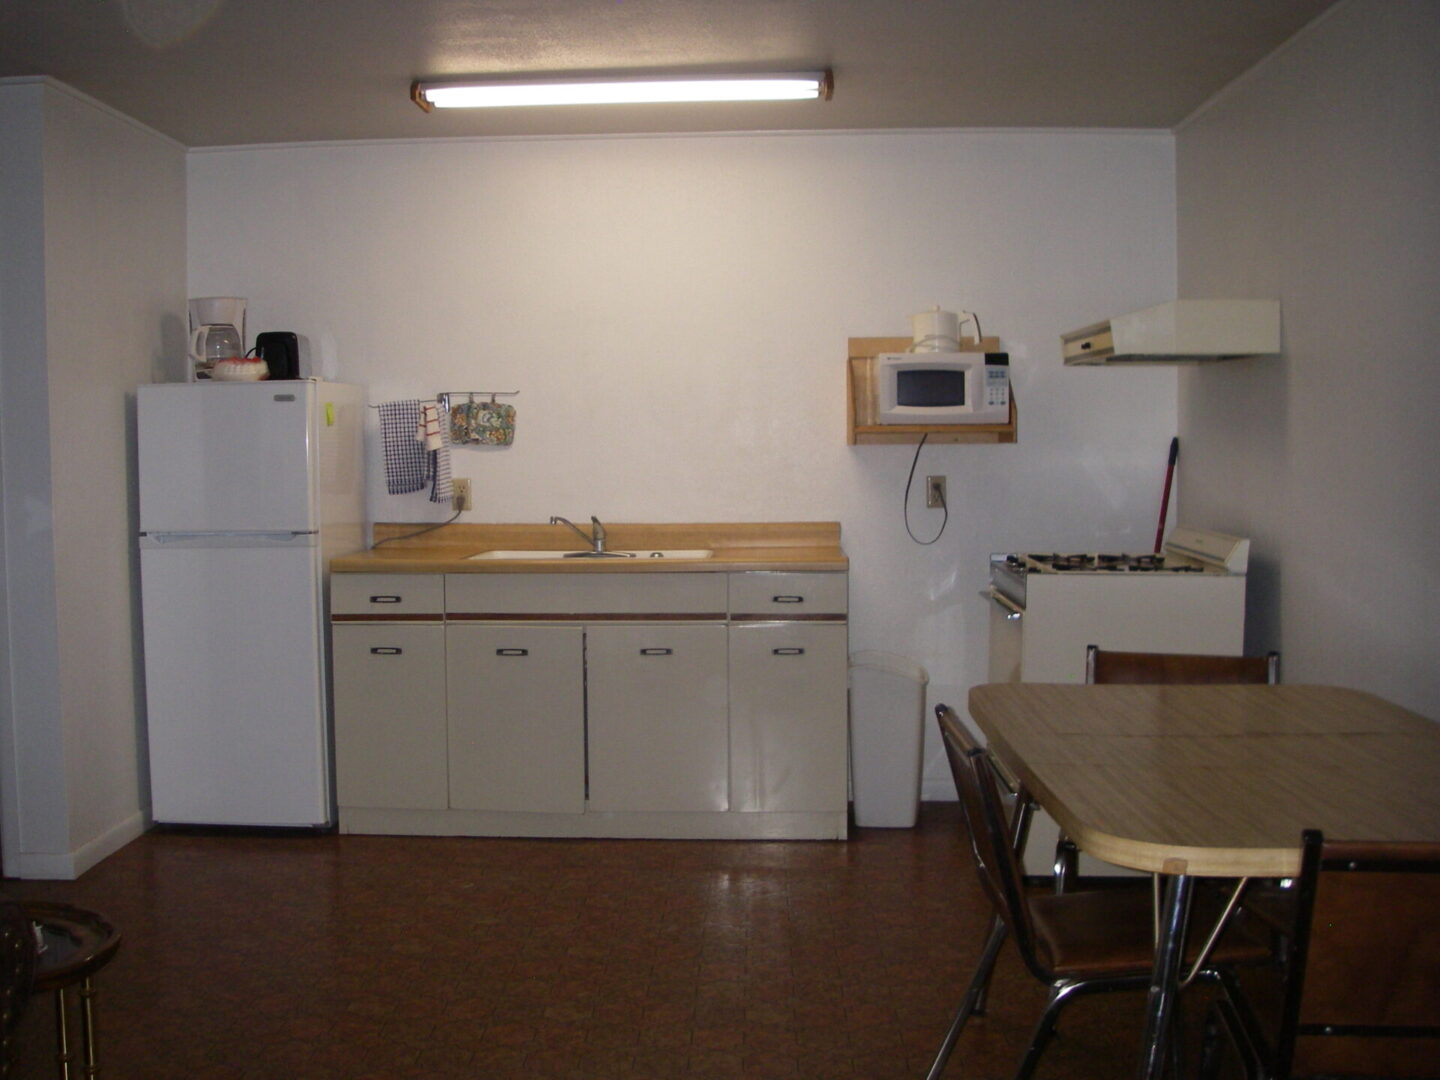 A kitchen with a table and chairs, refrigerator, microwave, sink and oven.